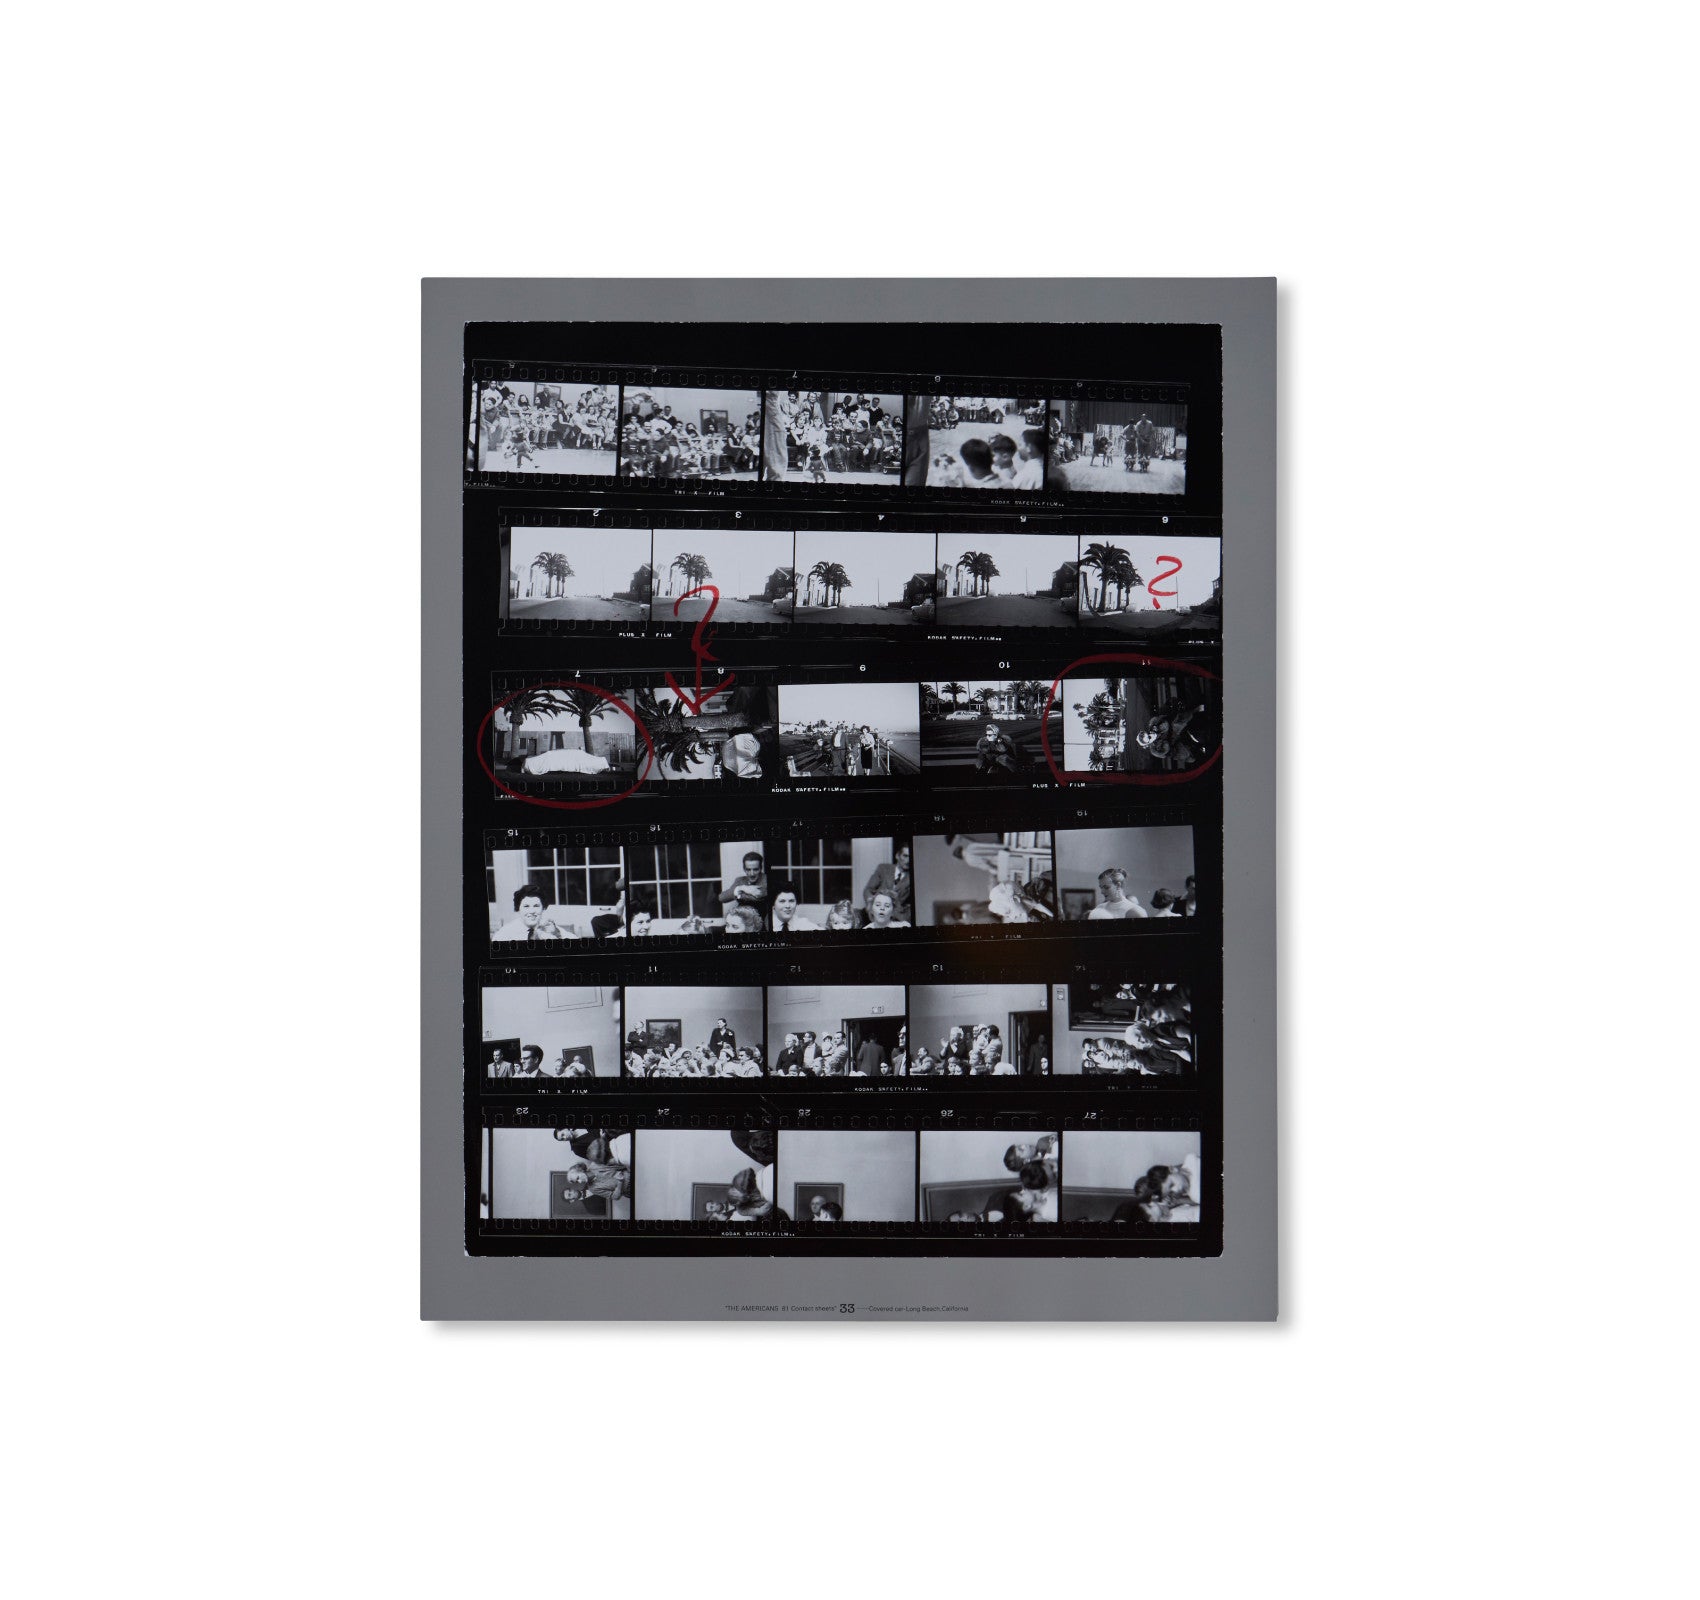 THE AMERICANS, 81 CONTACT SHEETS (FOLDING BOARD BOX) by Robert Frank [RARE]